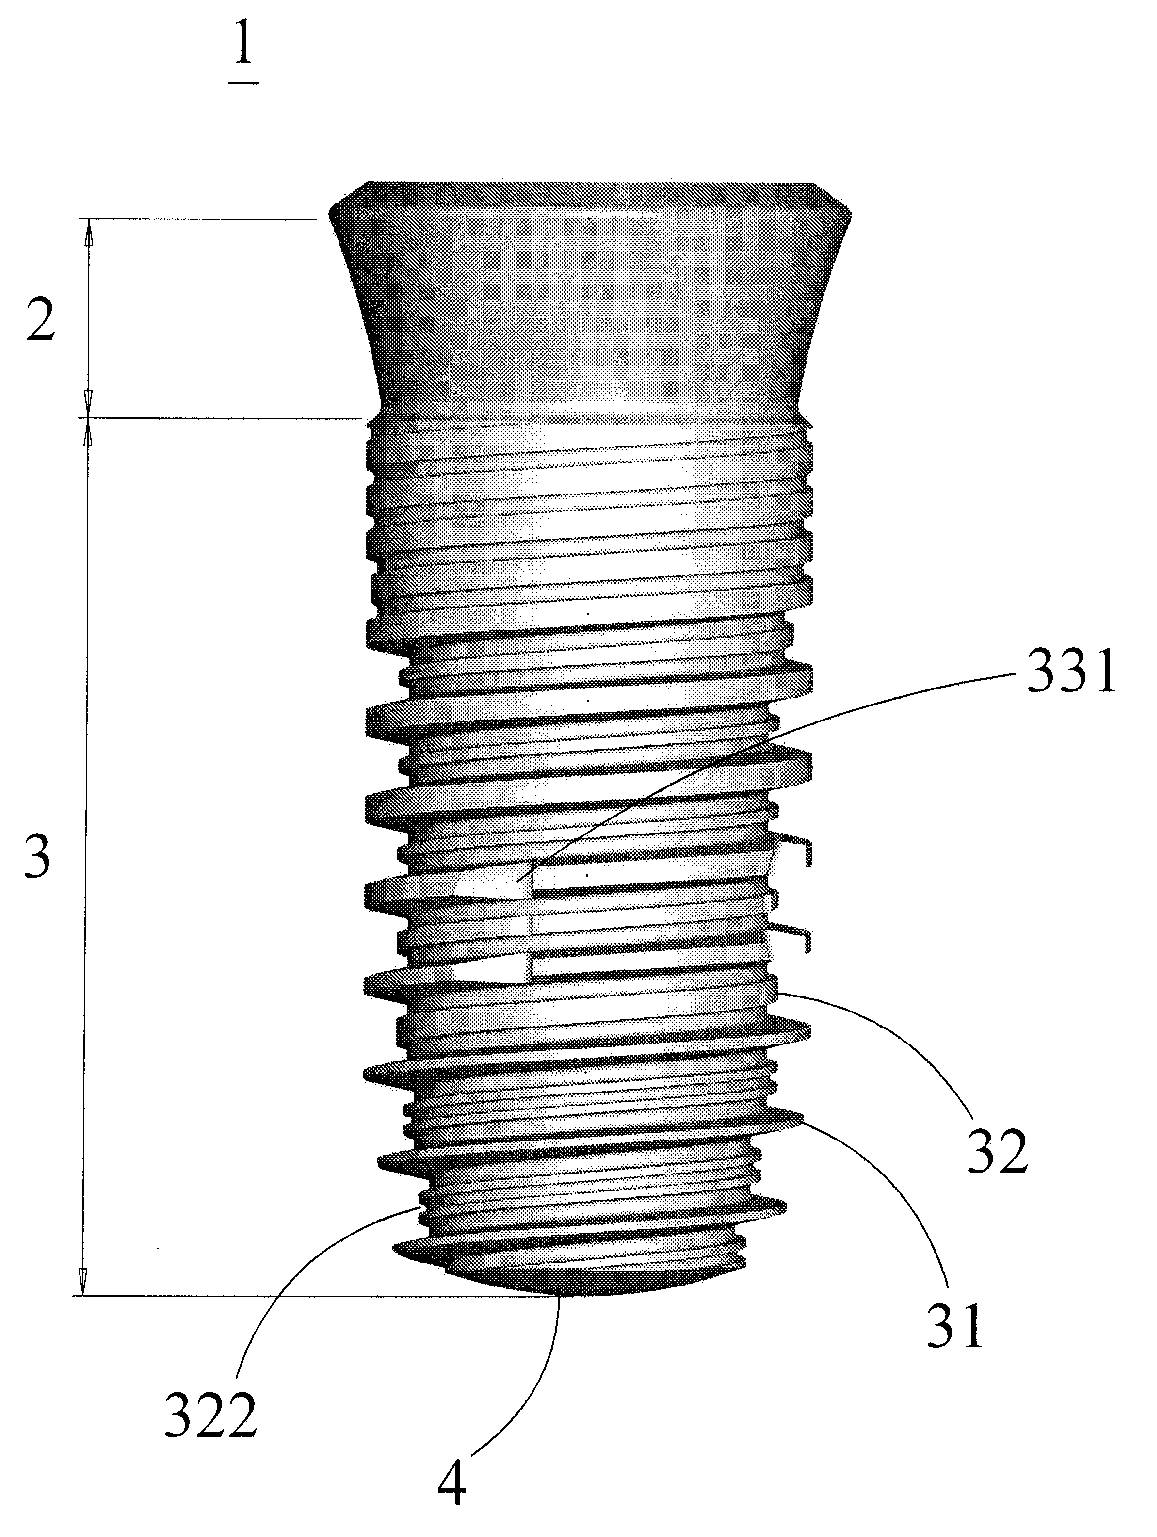 Artificial Root for Dental Implantation and Method for Manufacturing the Same